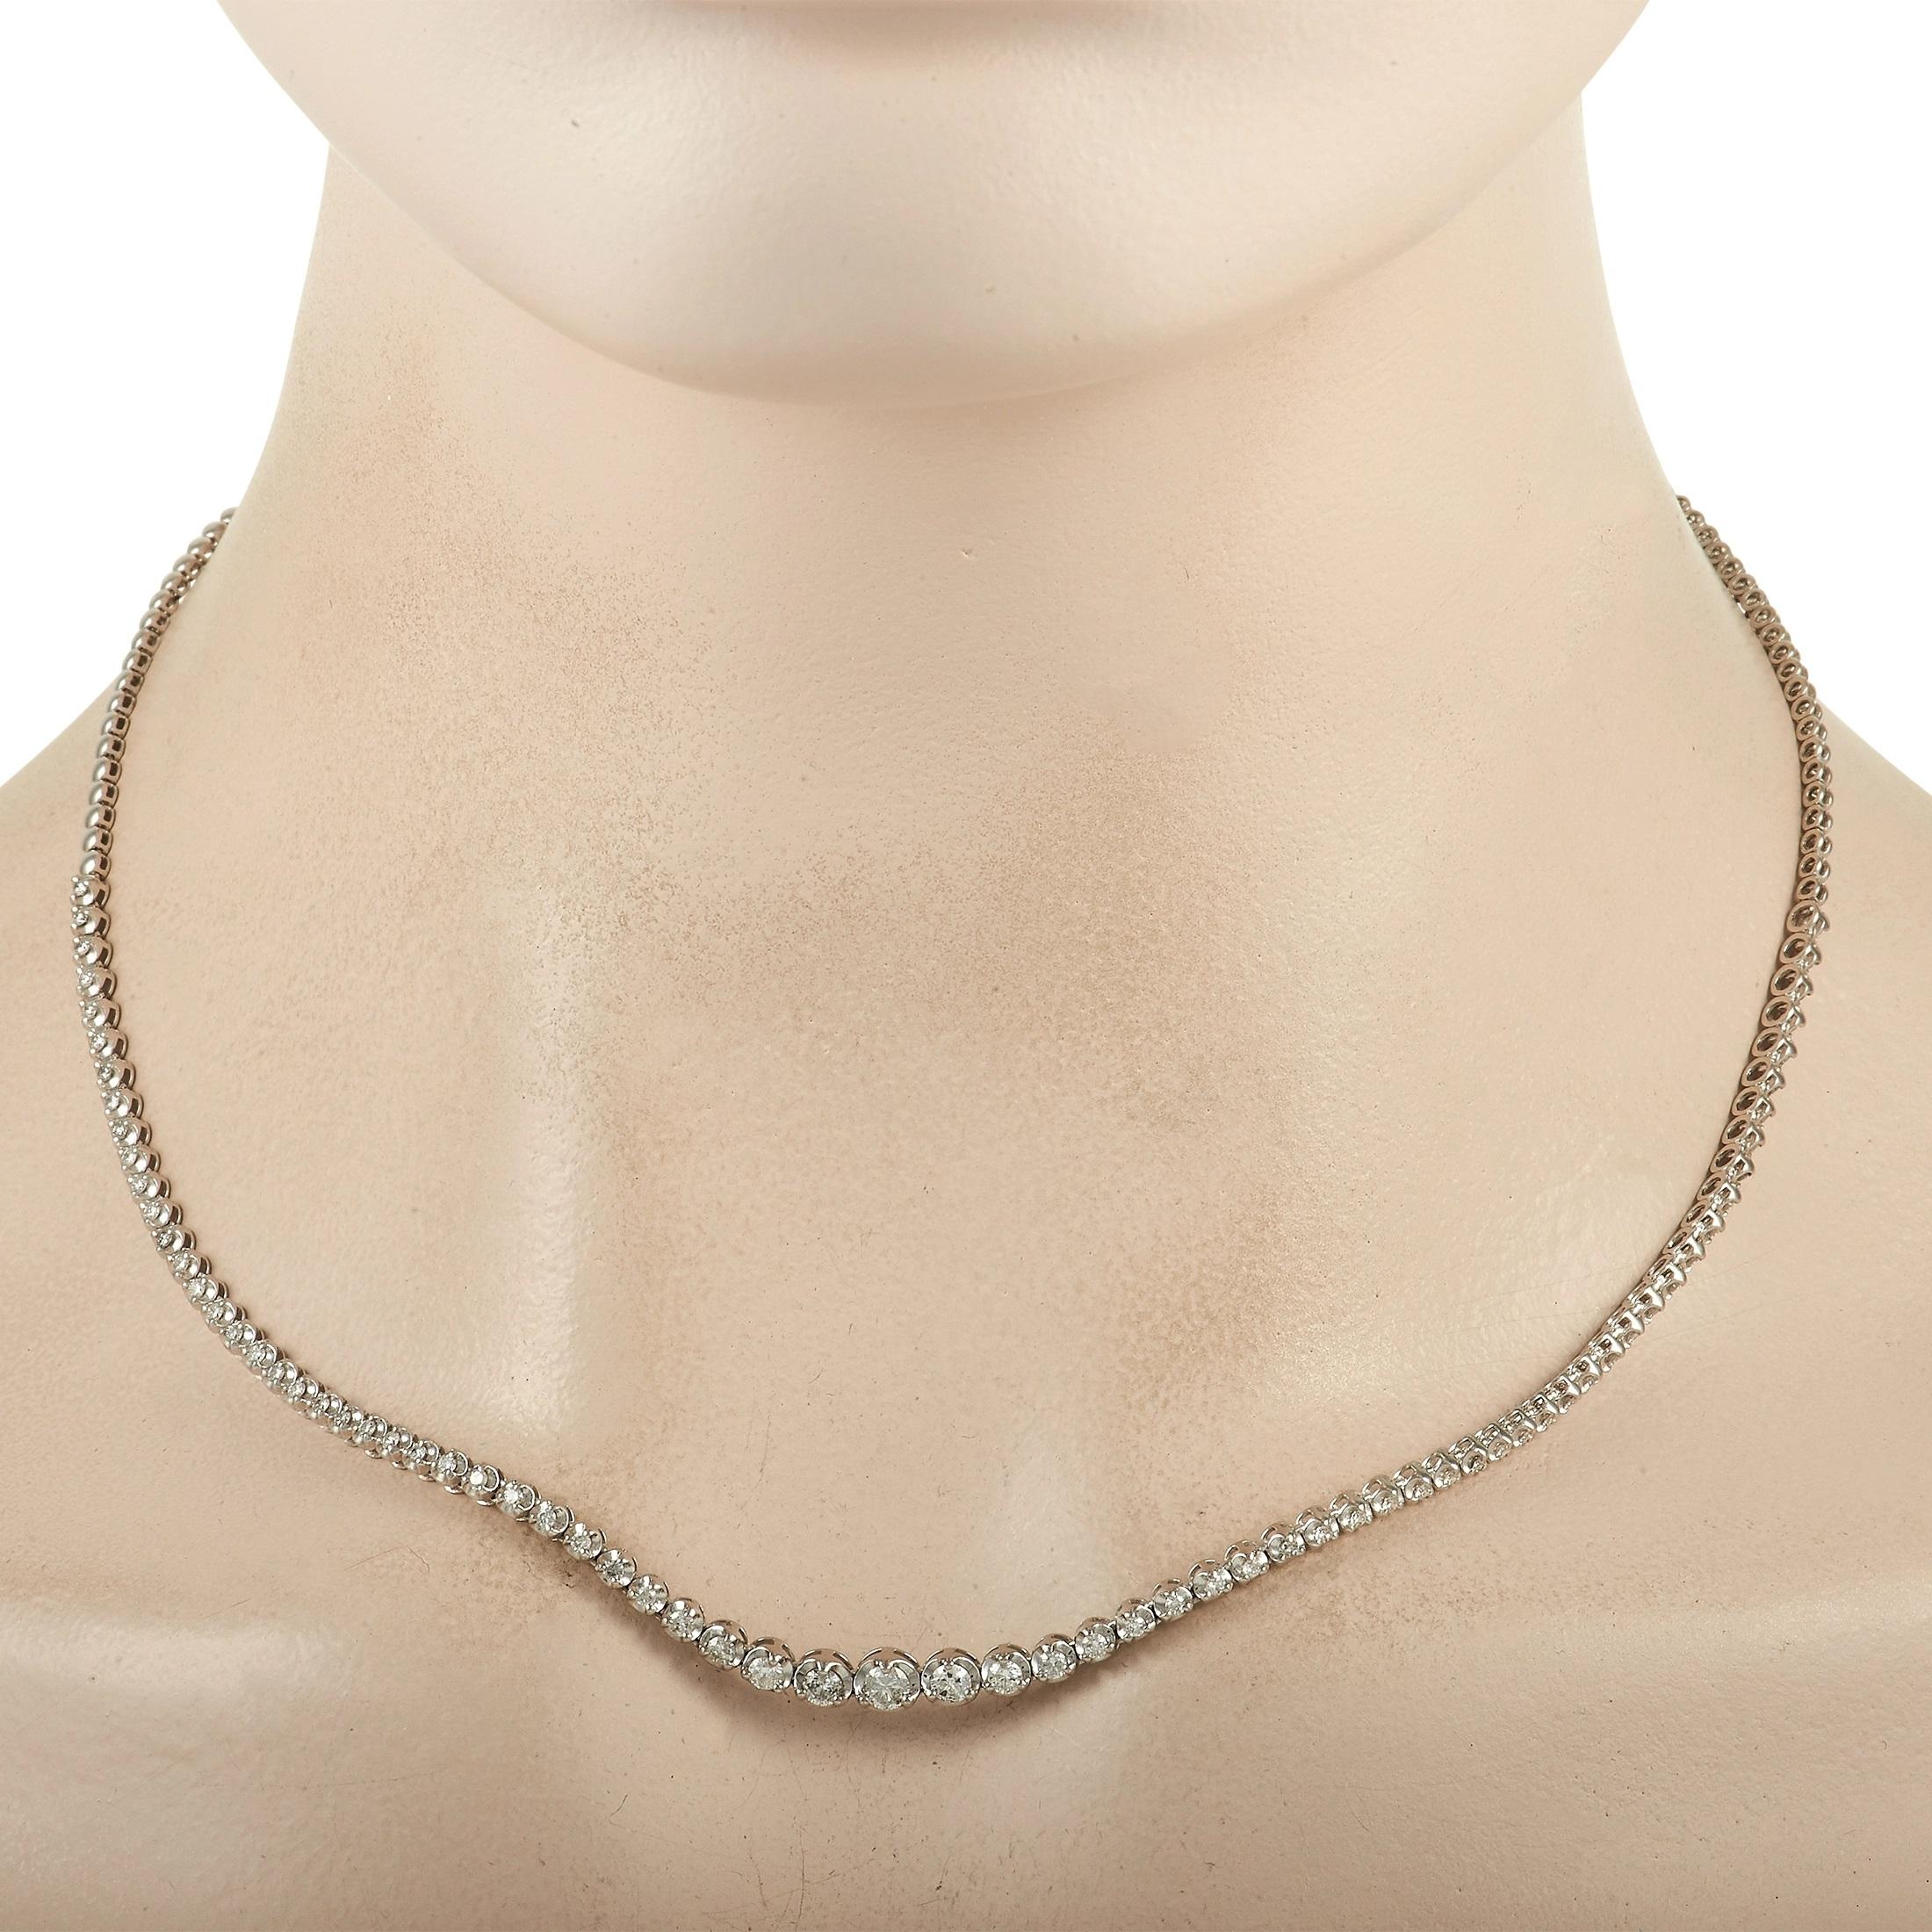 An eye-catching statement piece, this line diamond necklace or tennis chain necklace will bring a sense of drama to any outfit. It features a single strand of sparkling diamonds set in bezels that graduate in size, from small to large. The necklace